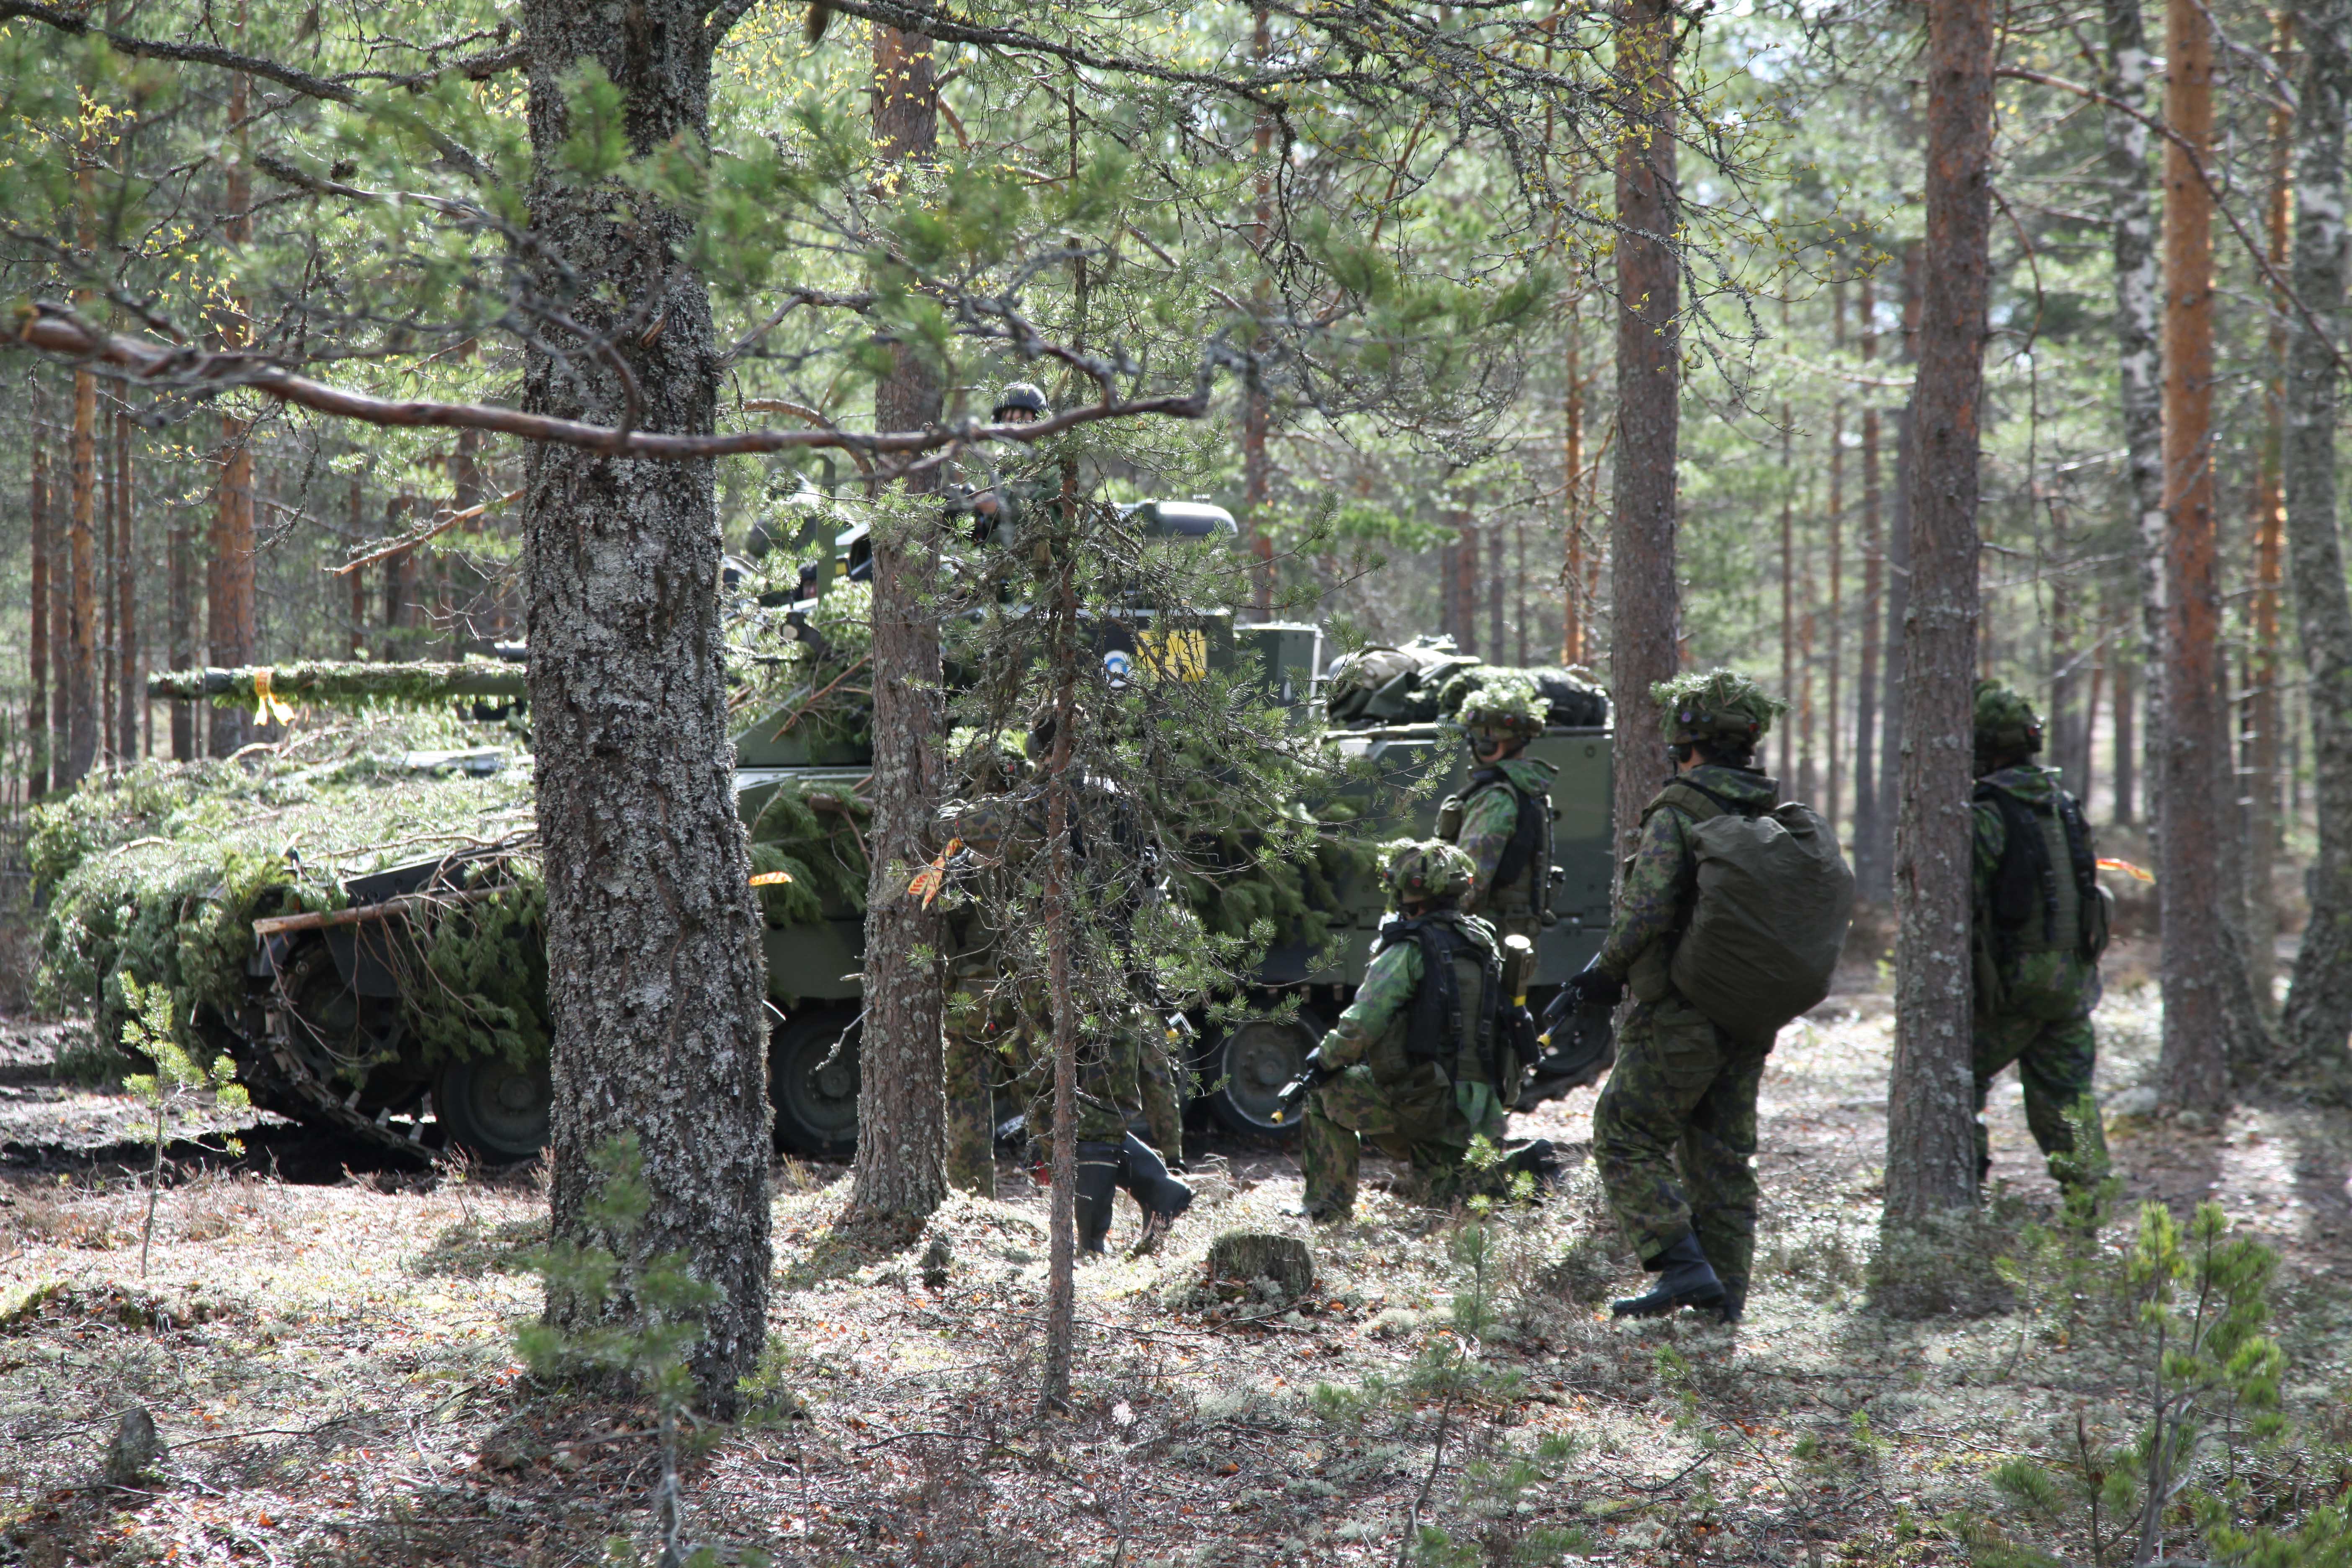 Tank and conscripts in the woods